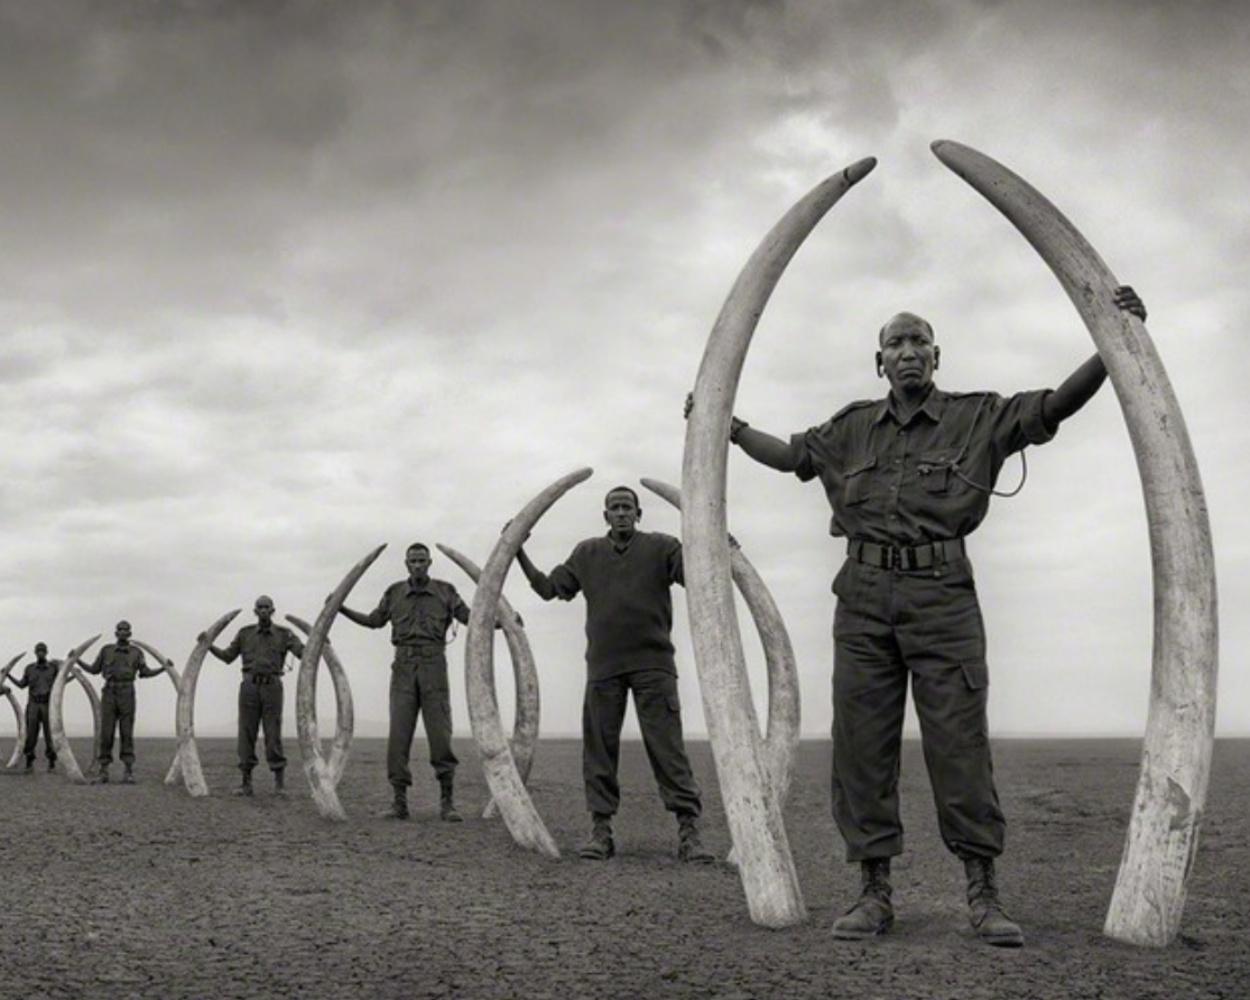 NICK BRANDT (*1966, England)
Rangers (Line of) with Tusks of Killed Elephants, Amboseli
2011
Archival inkjet print
Sheet 111.8 x 203.2 cm (44 x 80 in.)
Edition of 10; Ed. no. 10/10
Print only

Nick Brandt is a contemporary English photographer. His